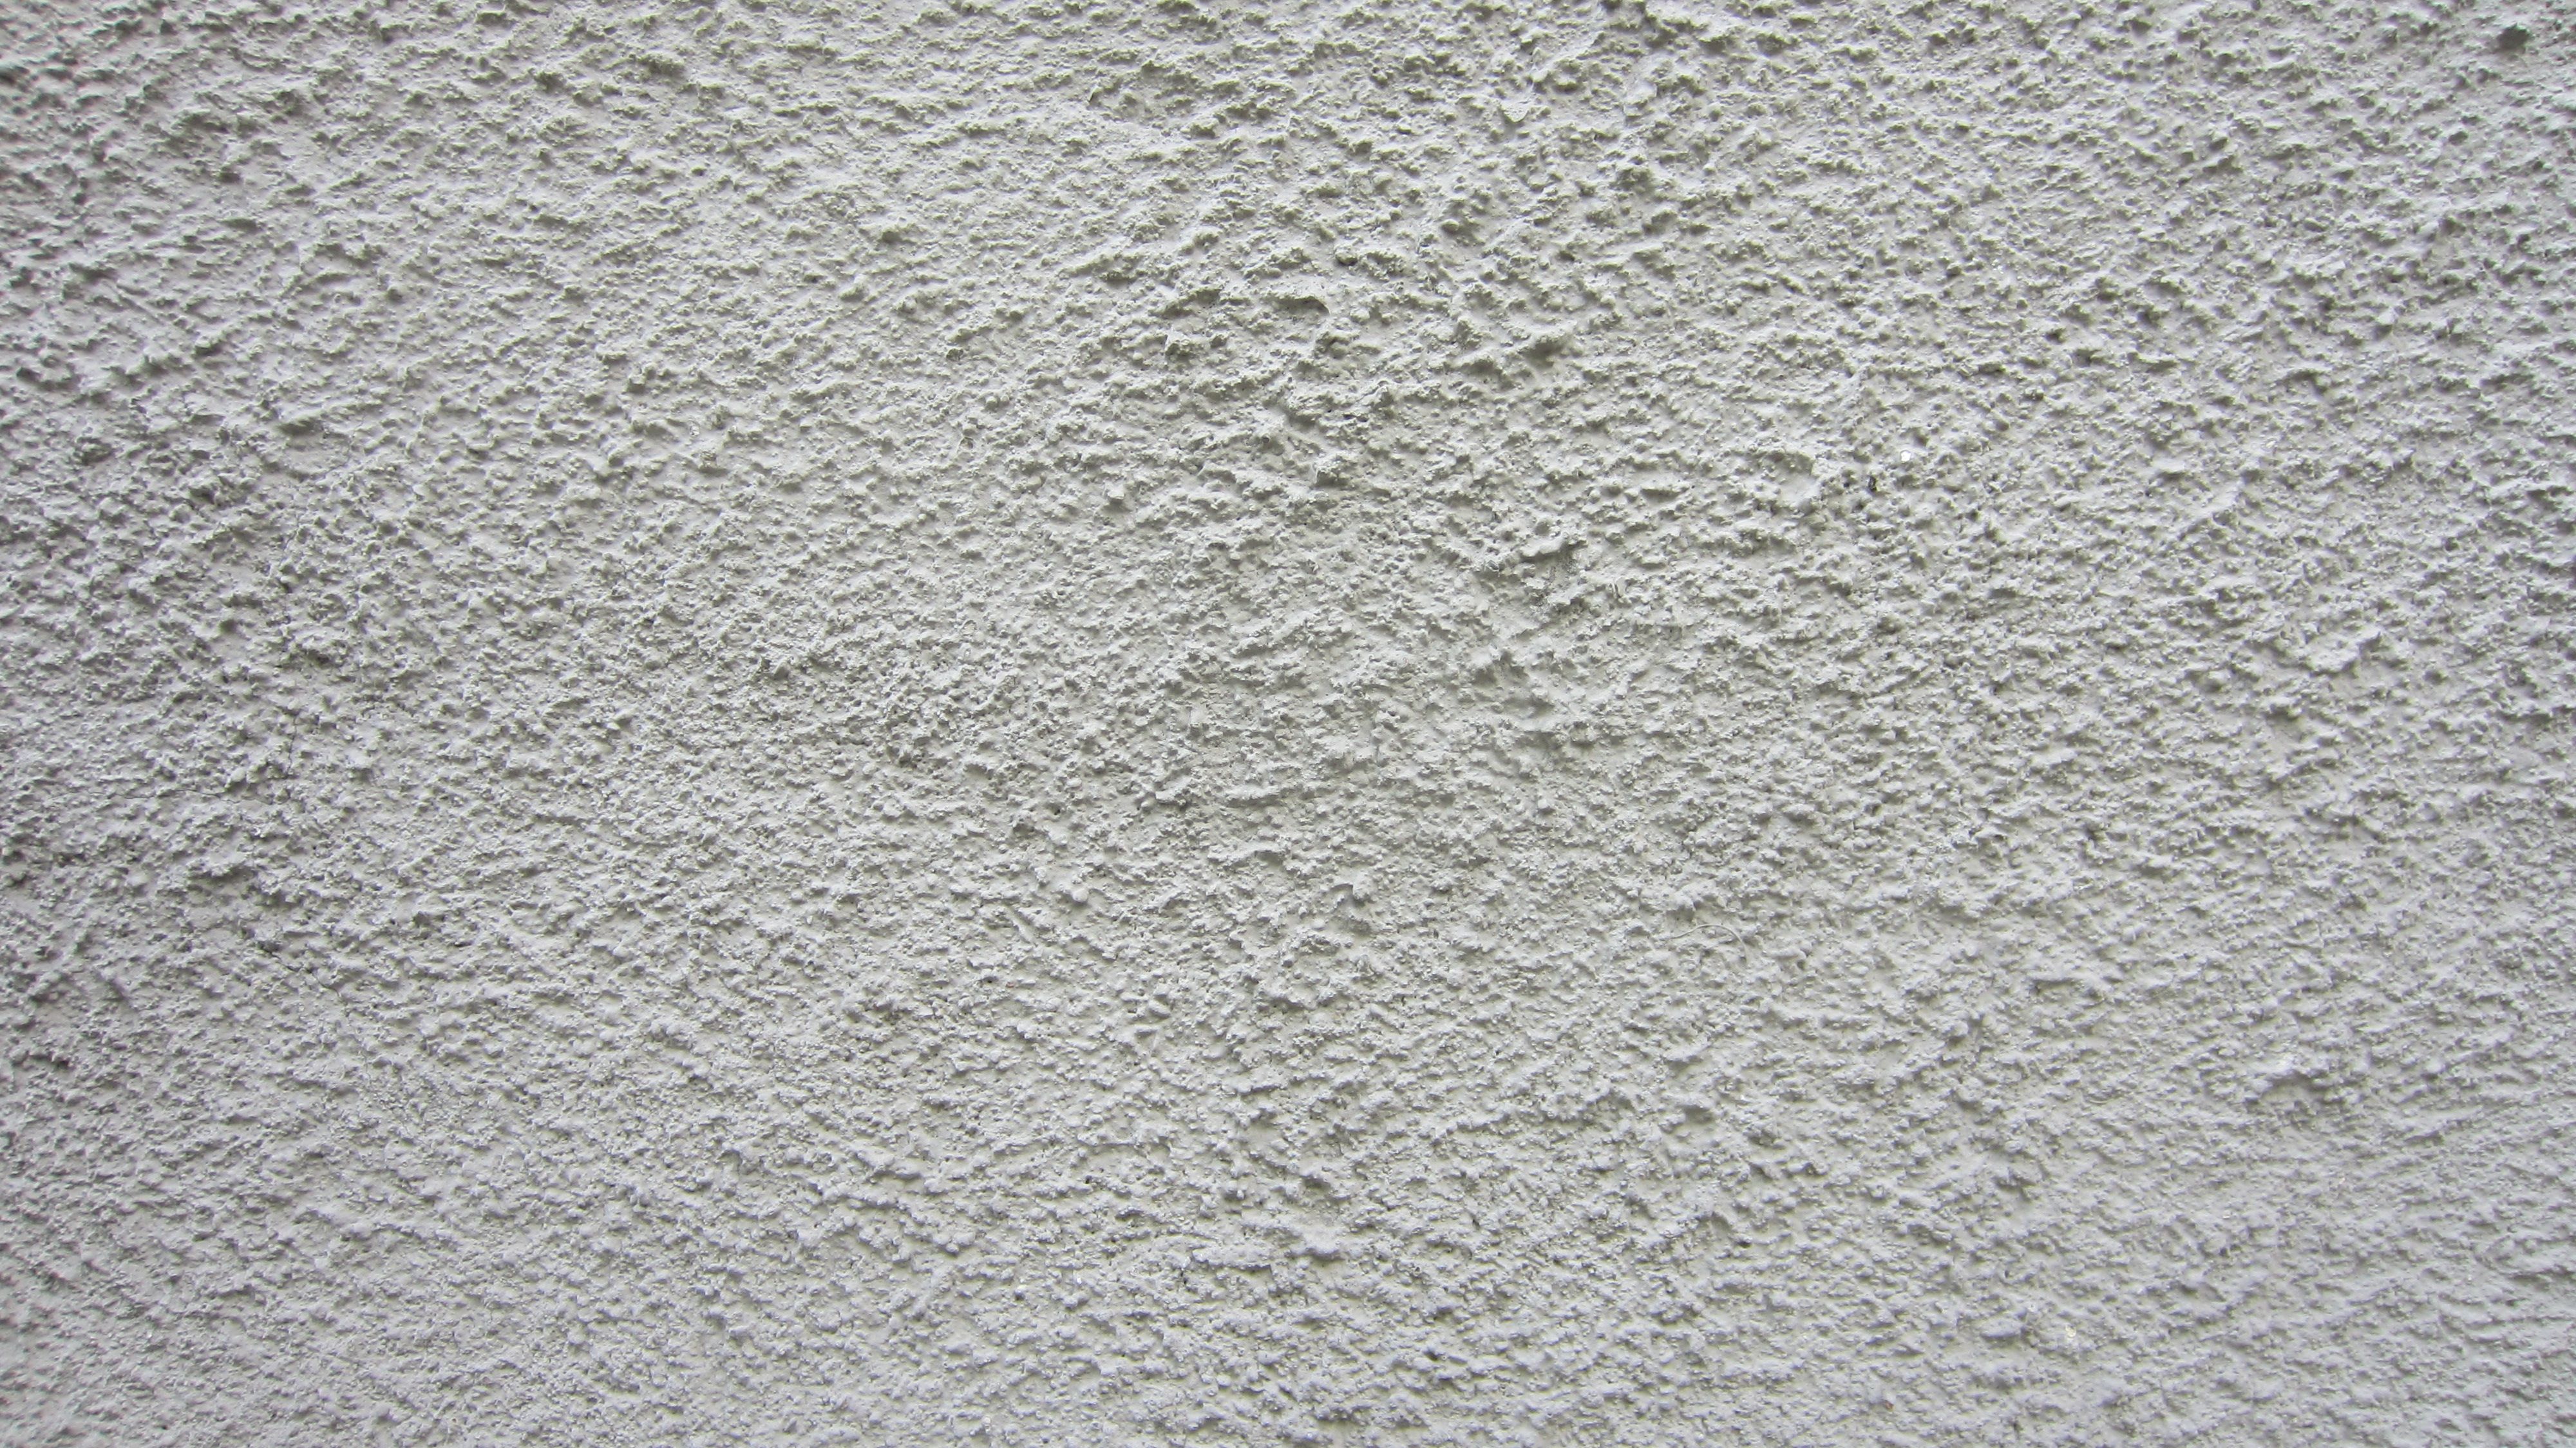 Surface of a plaster wall | 牆面wall | Pinterest | Plaster walls and ...